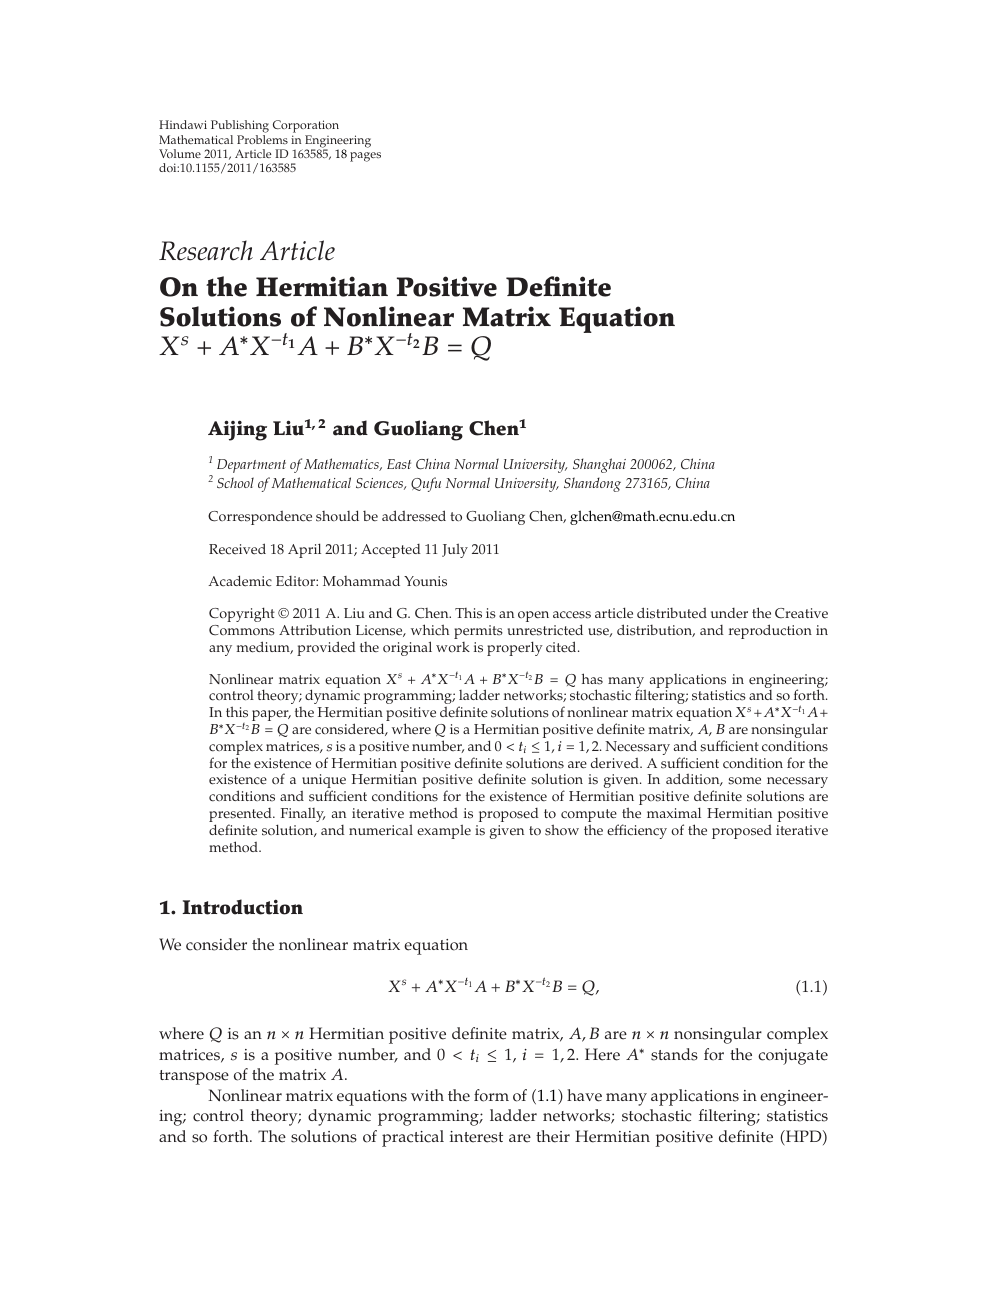 On The Hermitian Positive Definite Solutions Of Nonlinear Matrix Equation 𝑋𝑠 𝐴 𝑋 𝑡𝟏𝐴 𝐵 𝑋 𝑡𝟐𝐵 𝑄 Topic Of Research Paper In Mathematics Download Scholarly Article Pdf And Read For Free On Cyberleninka Open Science Hub